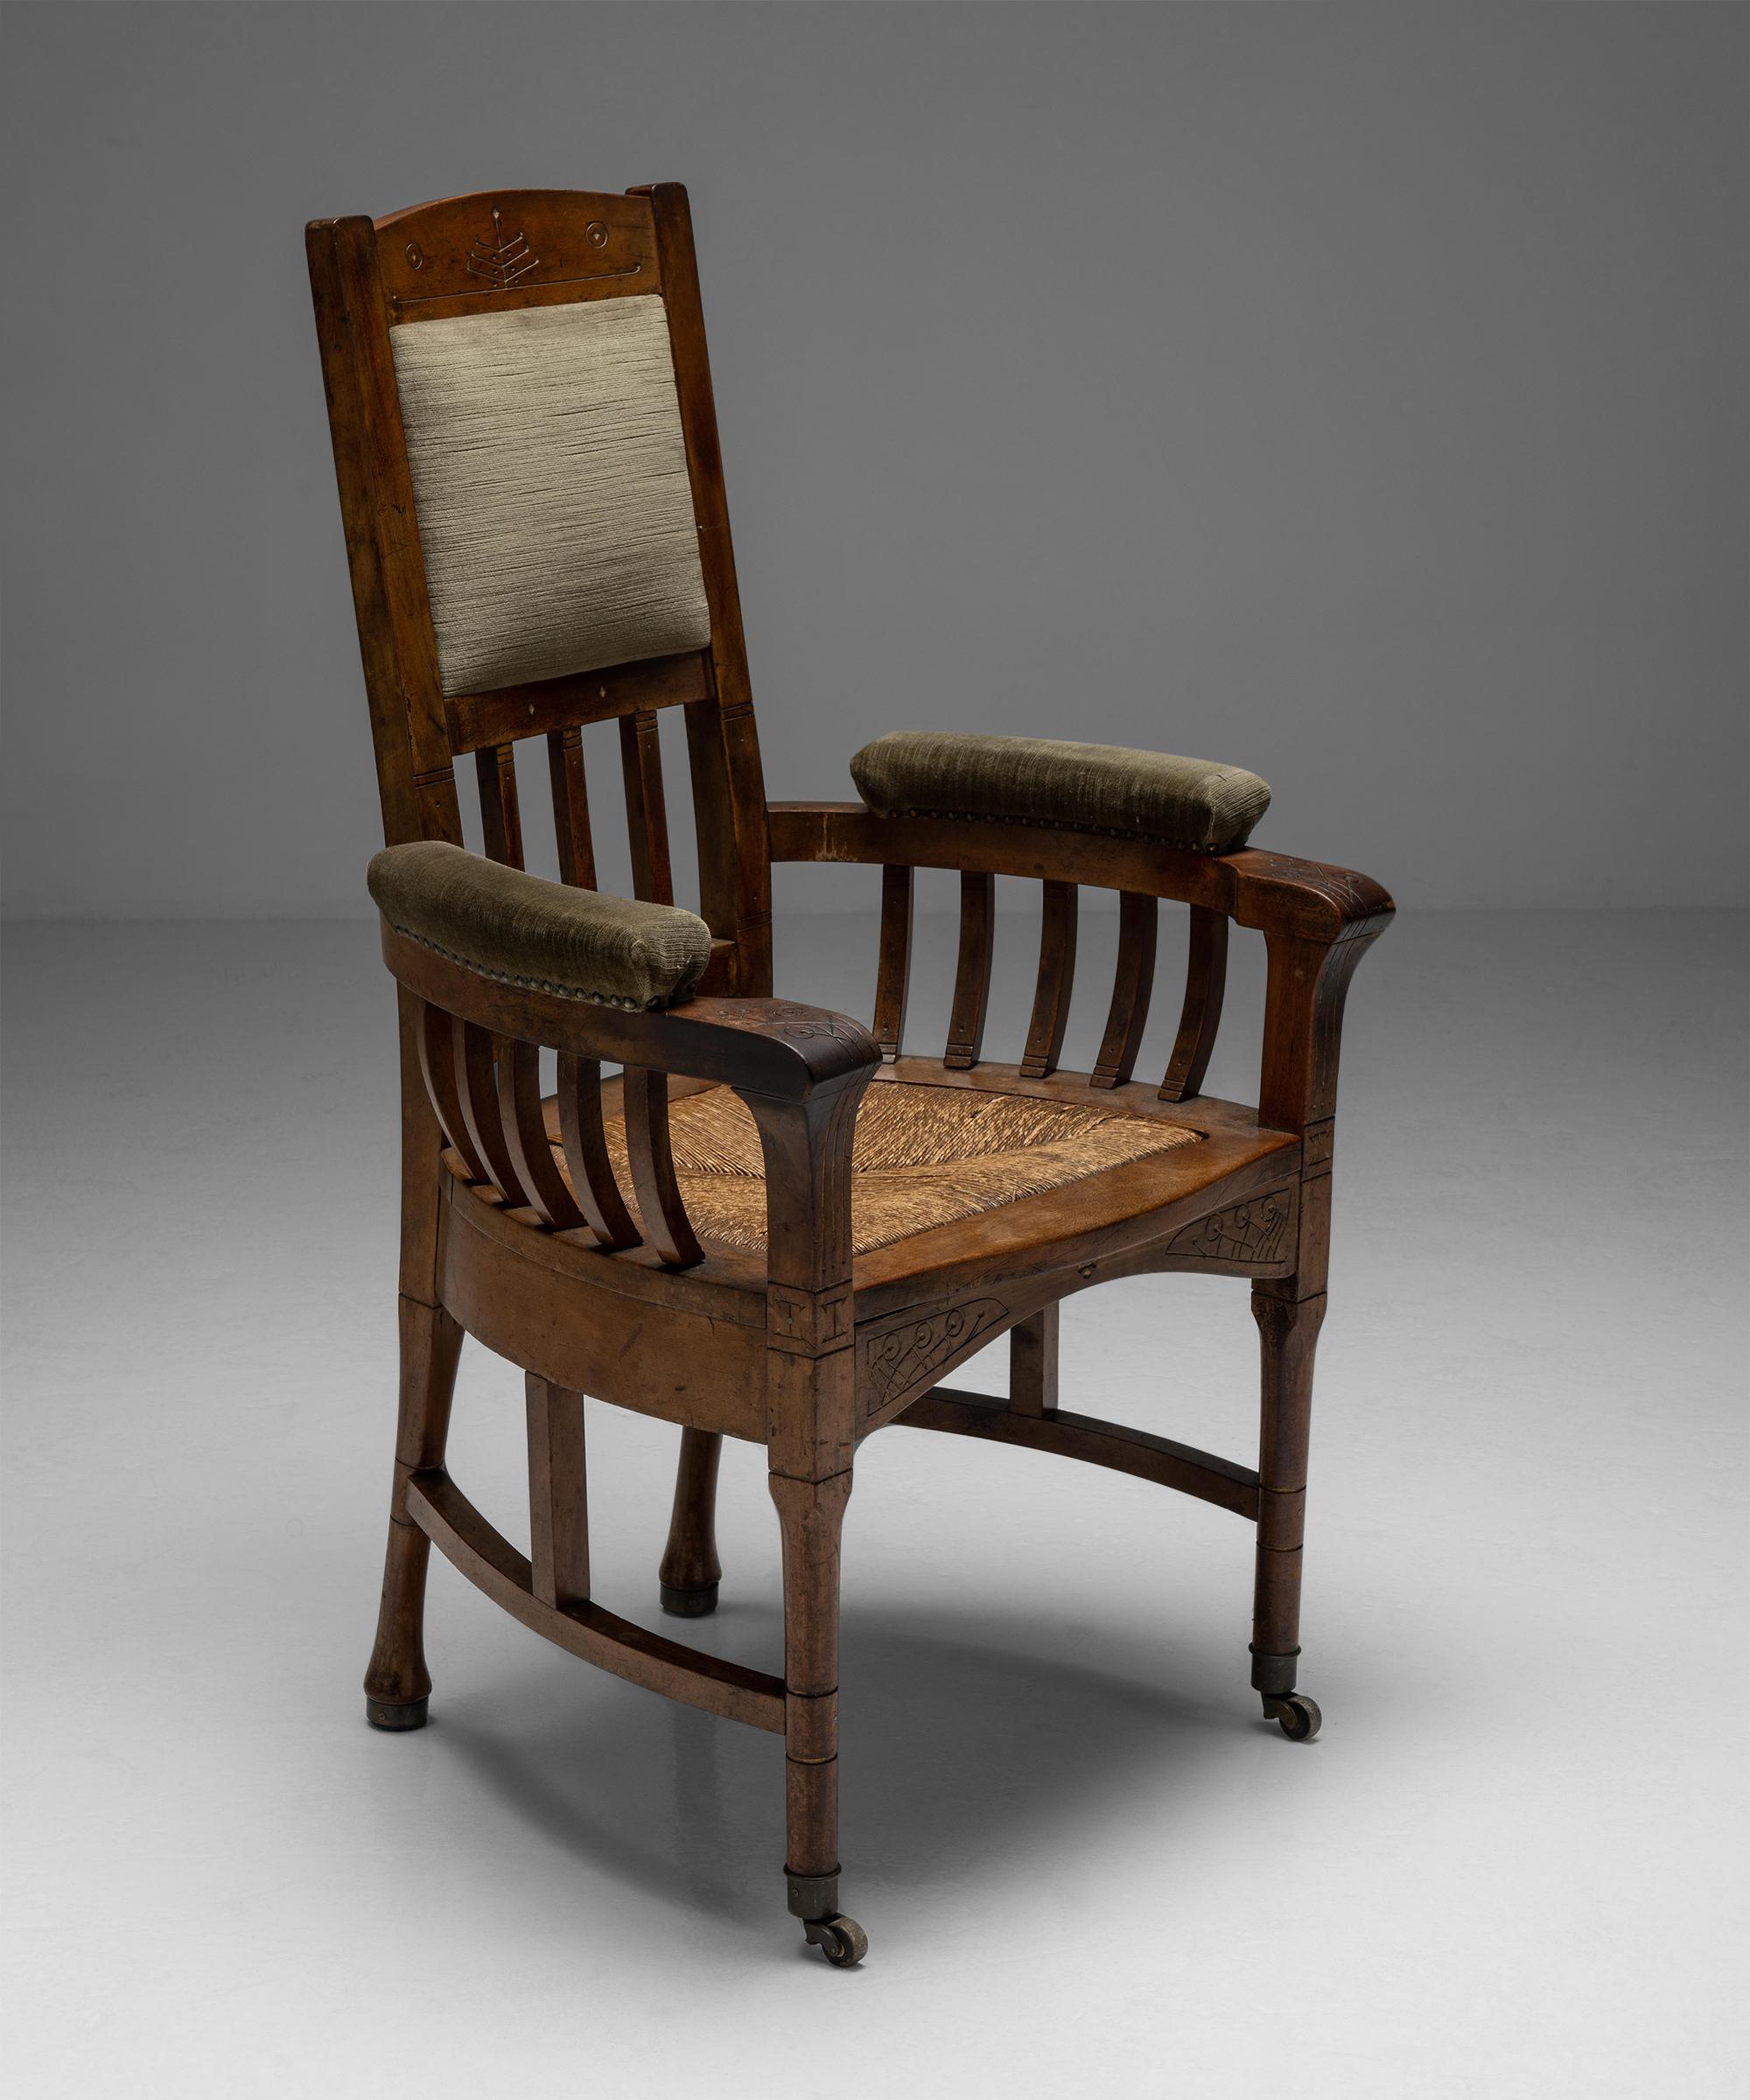 Arts & Crafts armchair no.2

France Circa 1900

Museum quality carved wooden chair with rush seat, and upholstered head and arm rests.

Measures: 26” W x 20”D x 40”H x 19.5”seat.